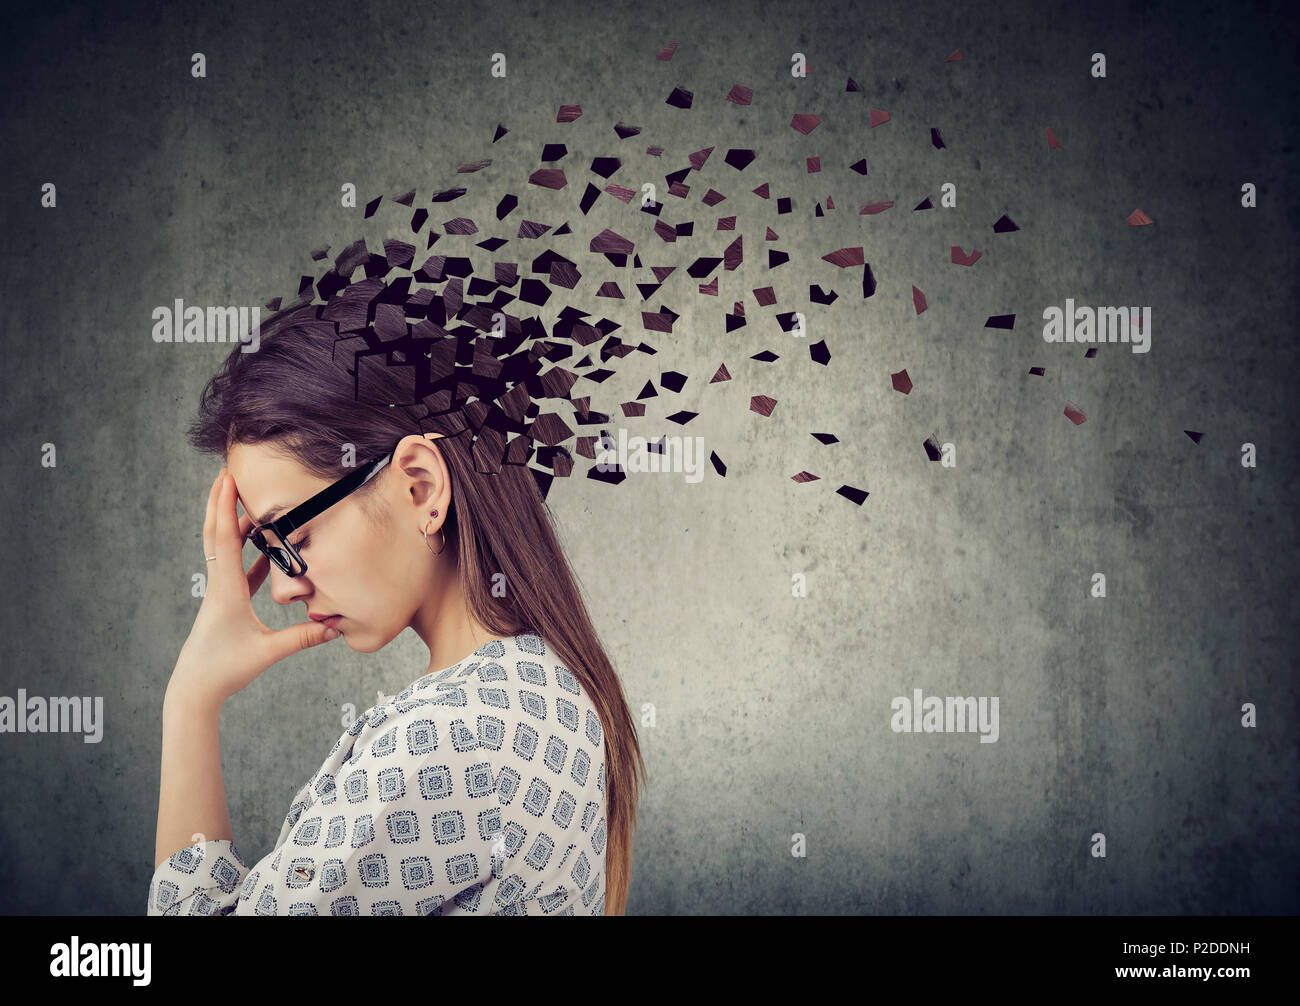 Memory loss due to dementia or brain damage. Young woman losing parts of  head as symbol of decreased mind function Stock Photo - Alamy